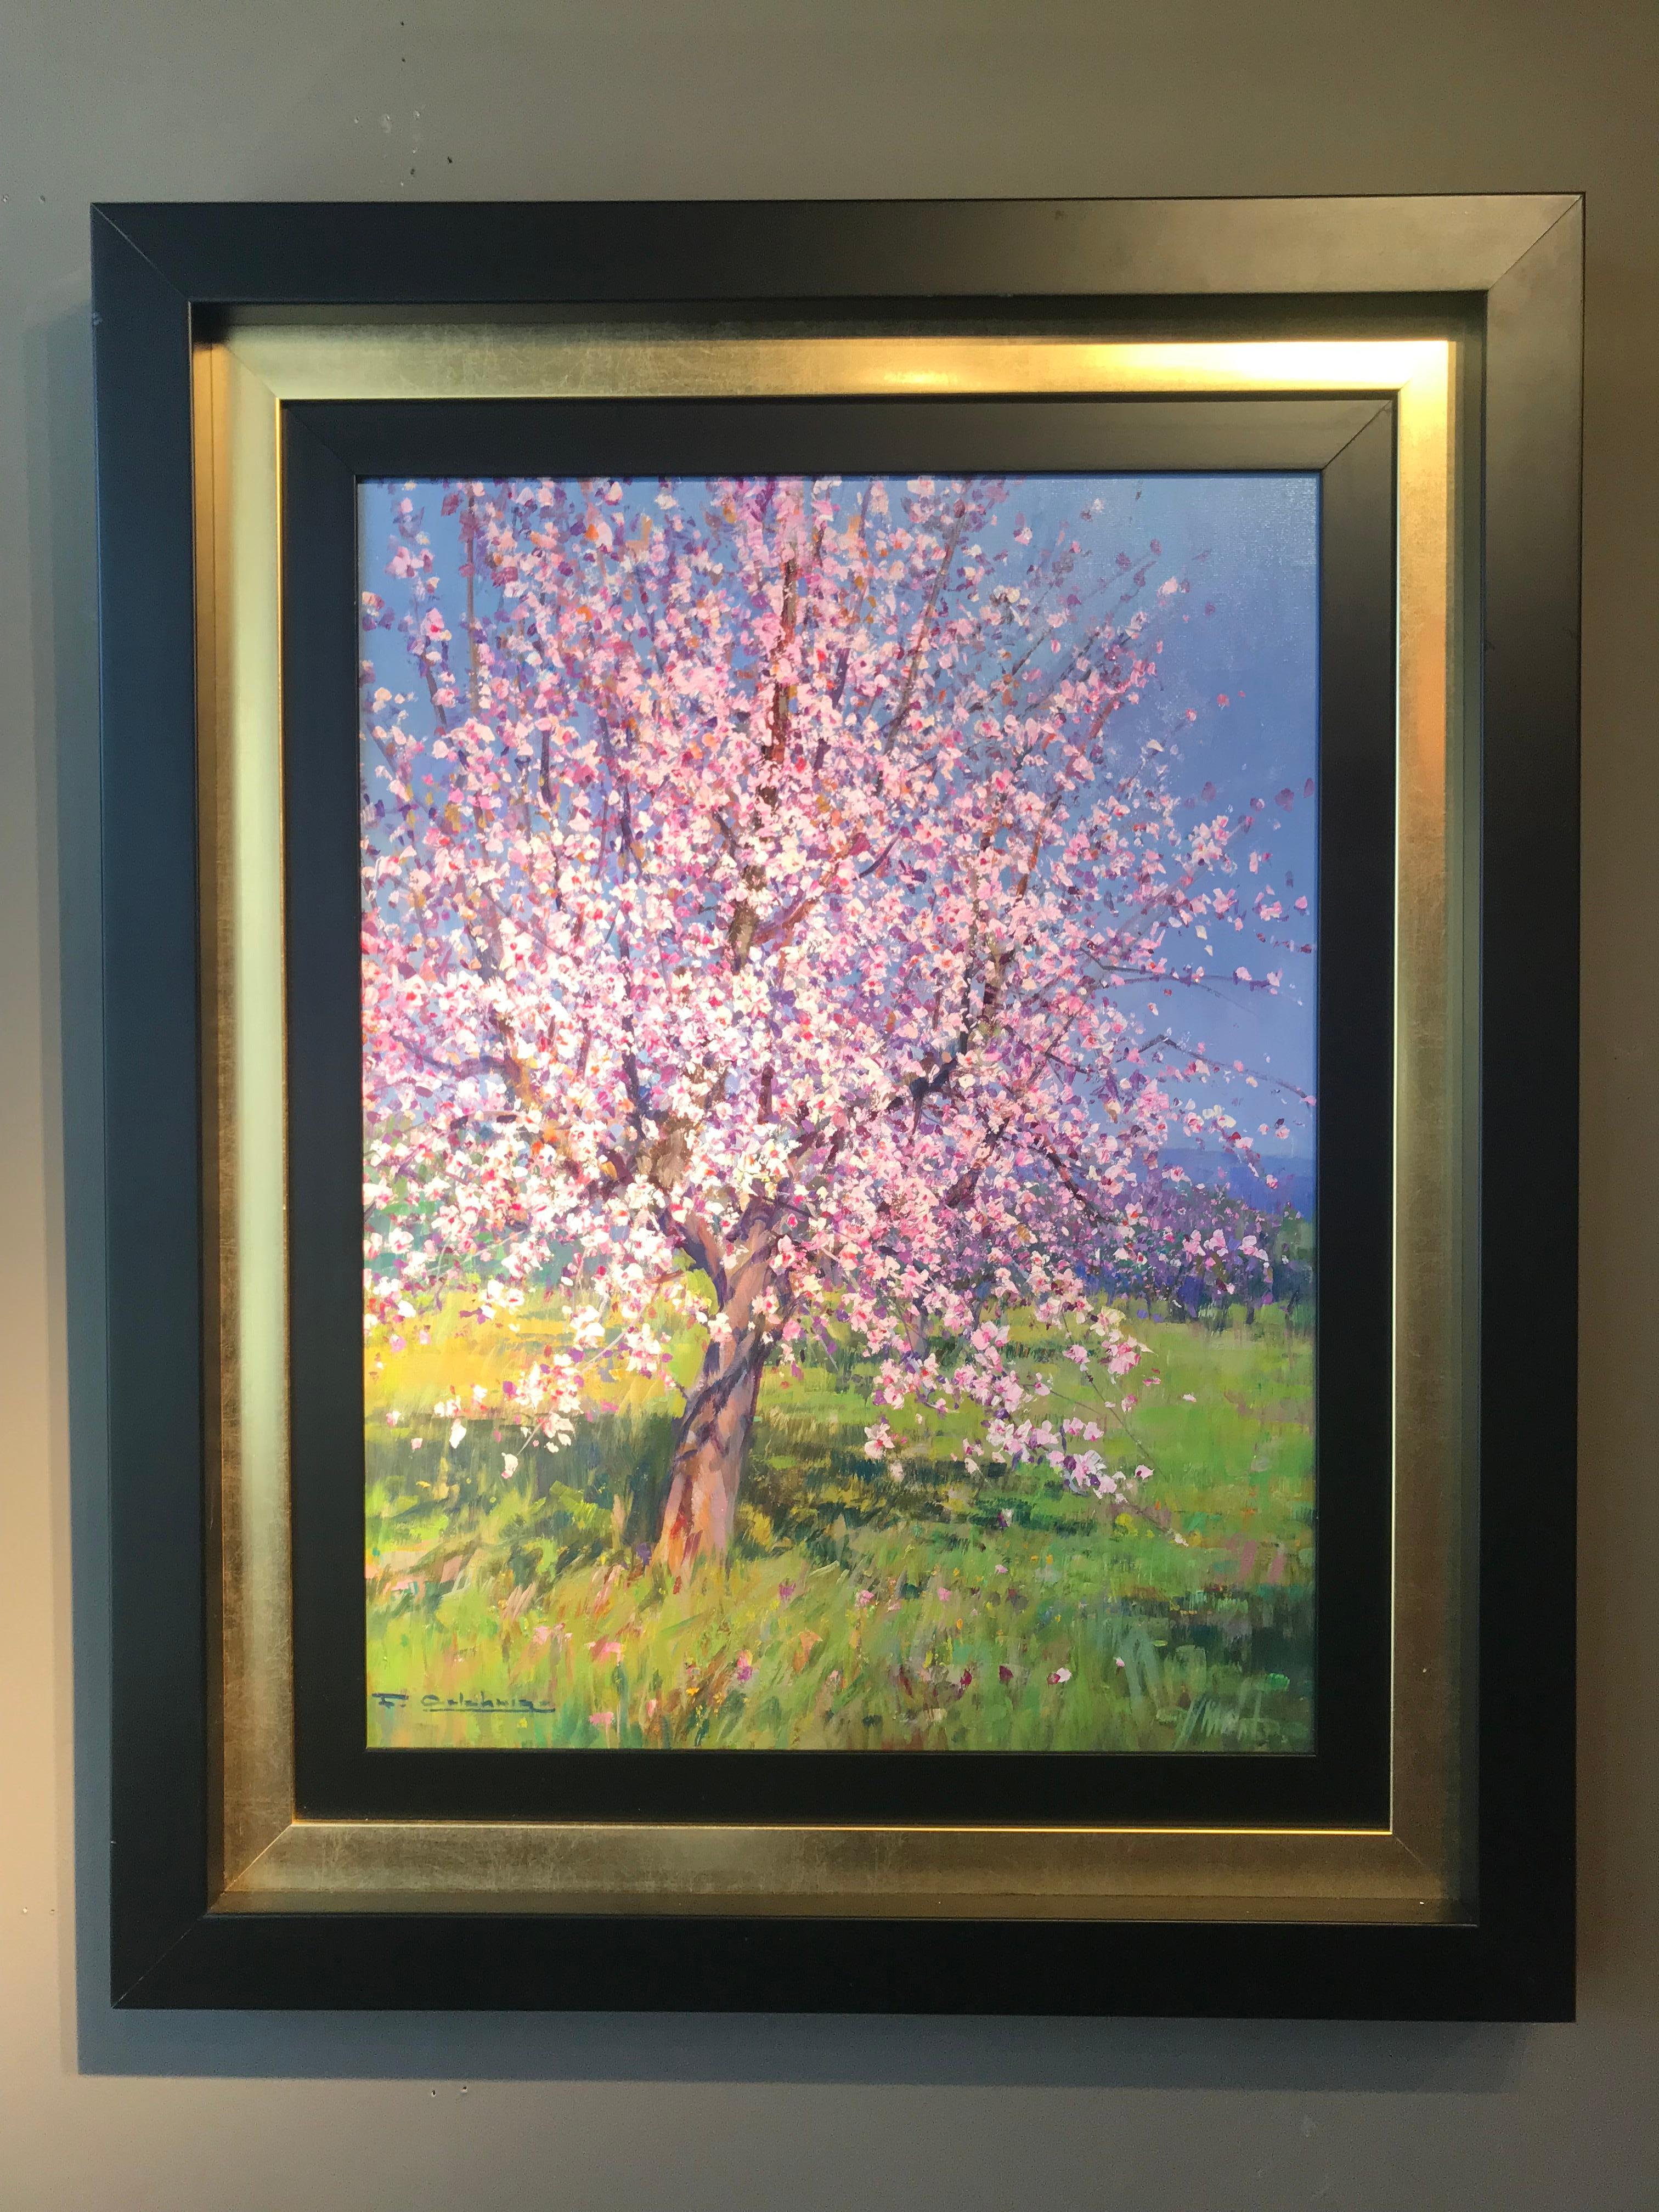 Contemporary Rural Pink Landscape painting of a Almond tree 'Blossom' byCalabuig - Painting by Francisco Calabuig